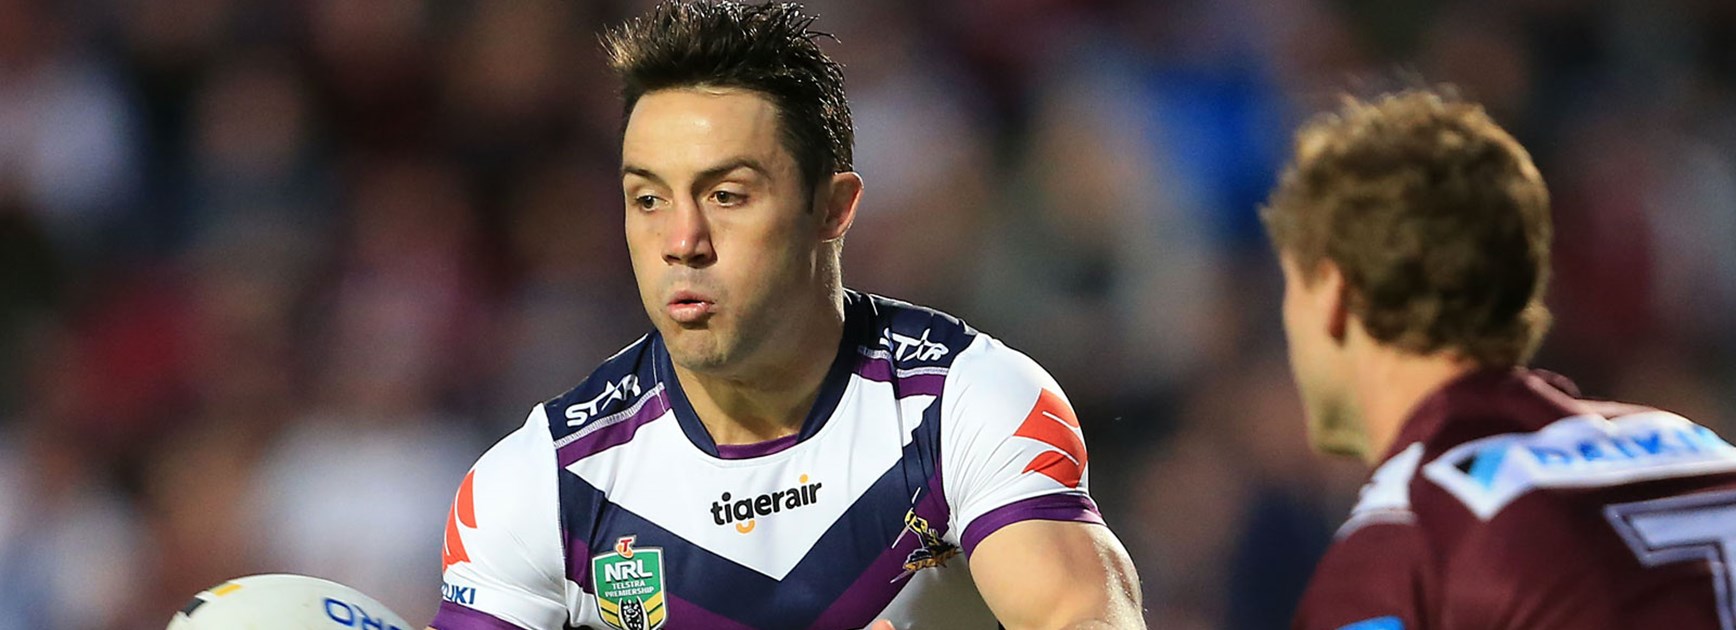 Storm halfback Cooper Cronk against the Sea Eagles in Round 24.